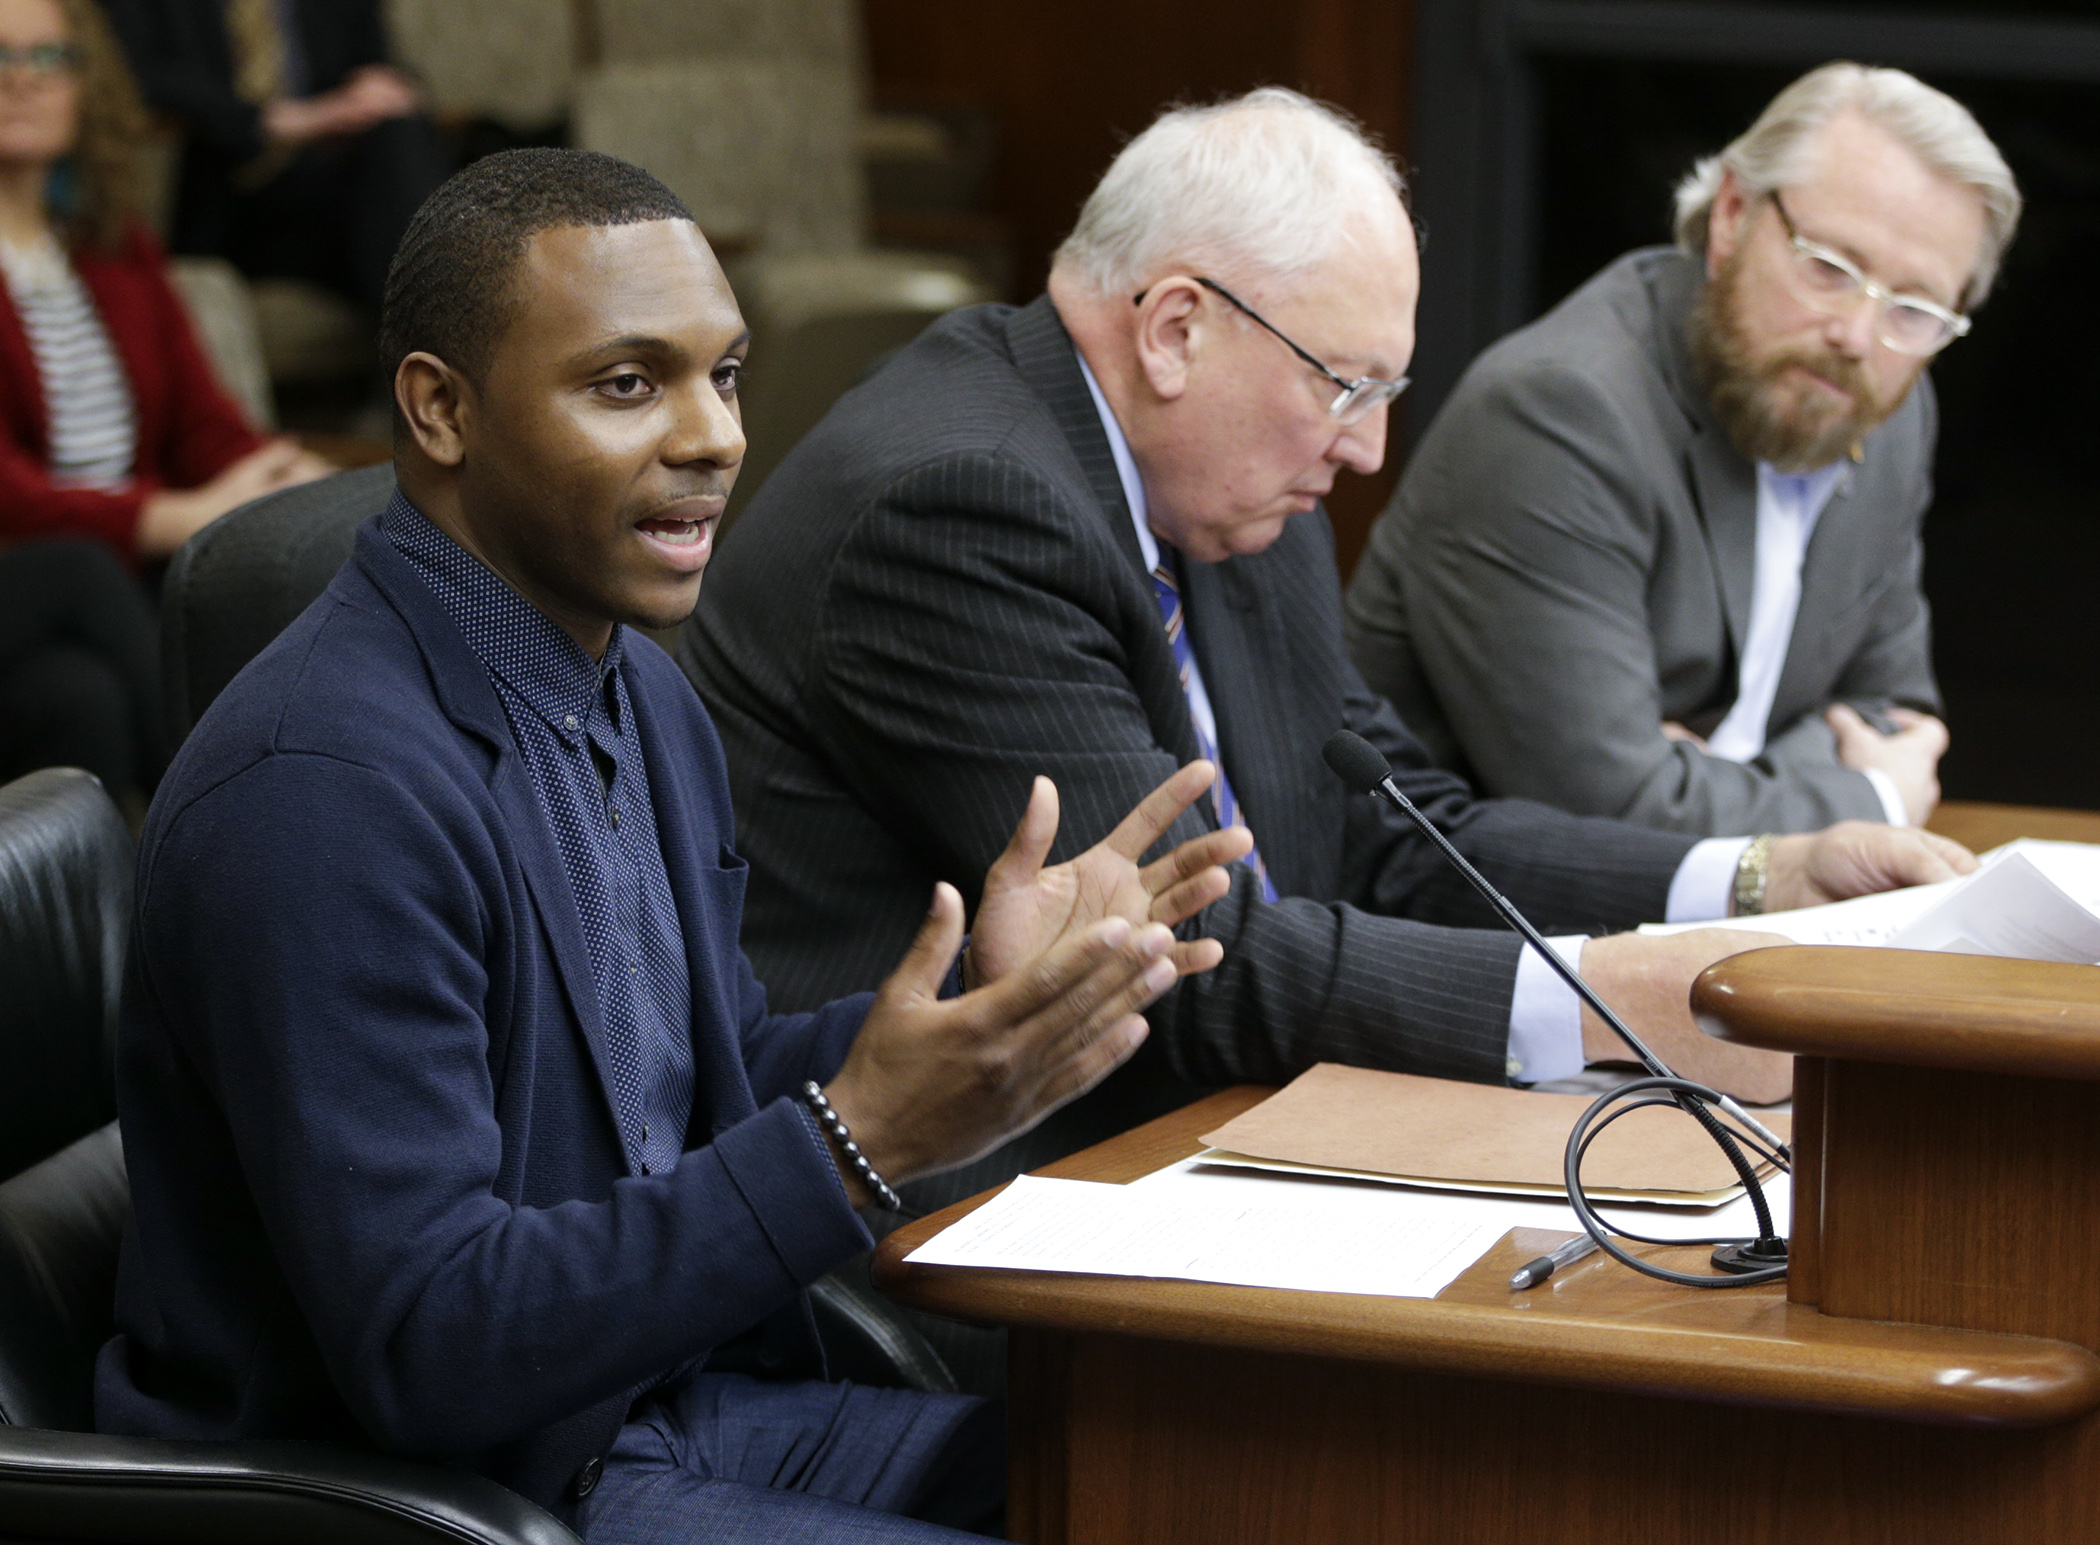 Elizer Darris, an organizer with the American Civil Liberties Union, testifies in favor of HF951, sponsored by Rep. Raymond Dehn, right, to restore the right to vote after an individual has been released from incarceration. Photo by Paul Battaglia